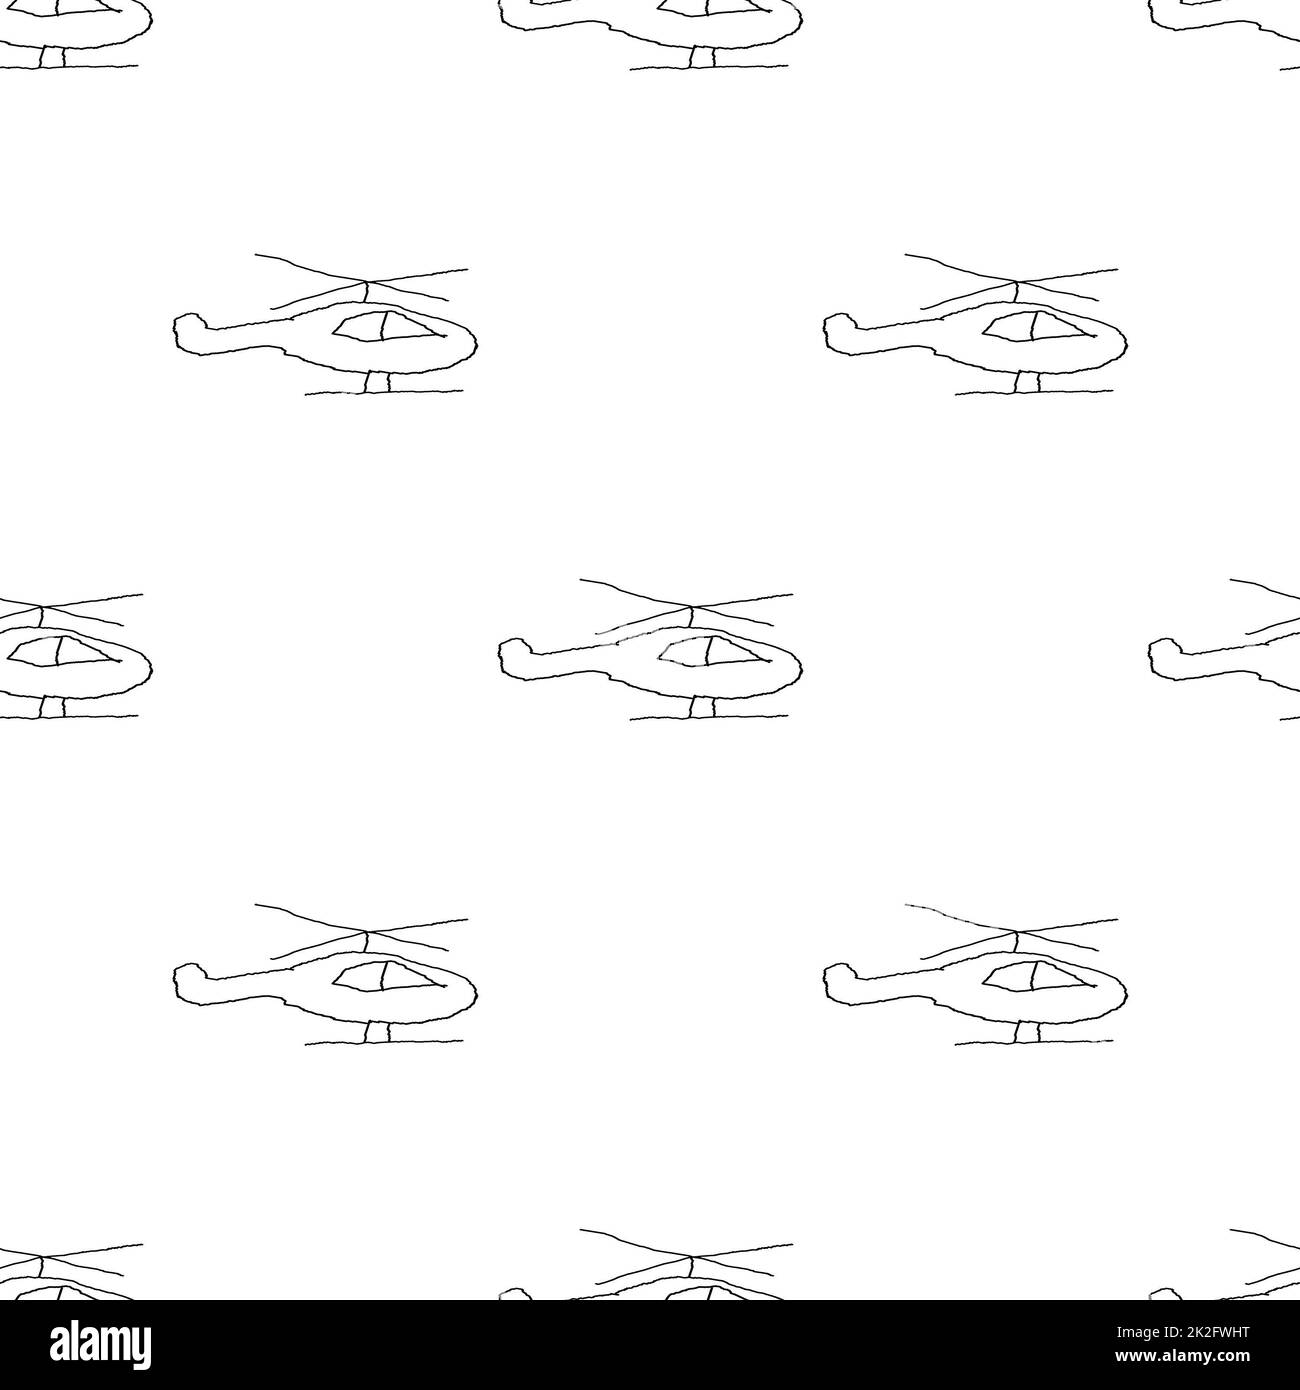 Cartoon Sketchy Helicopter Drawing Motif Pattern Stock Photo